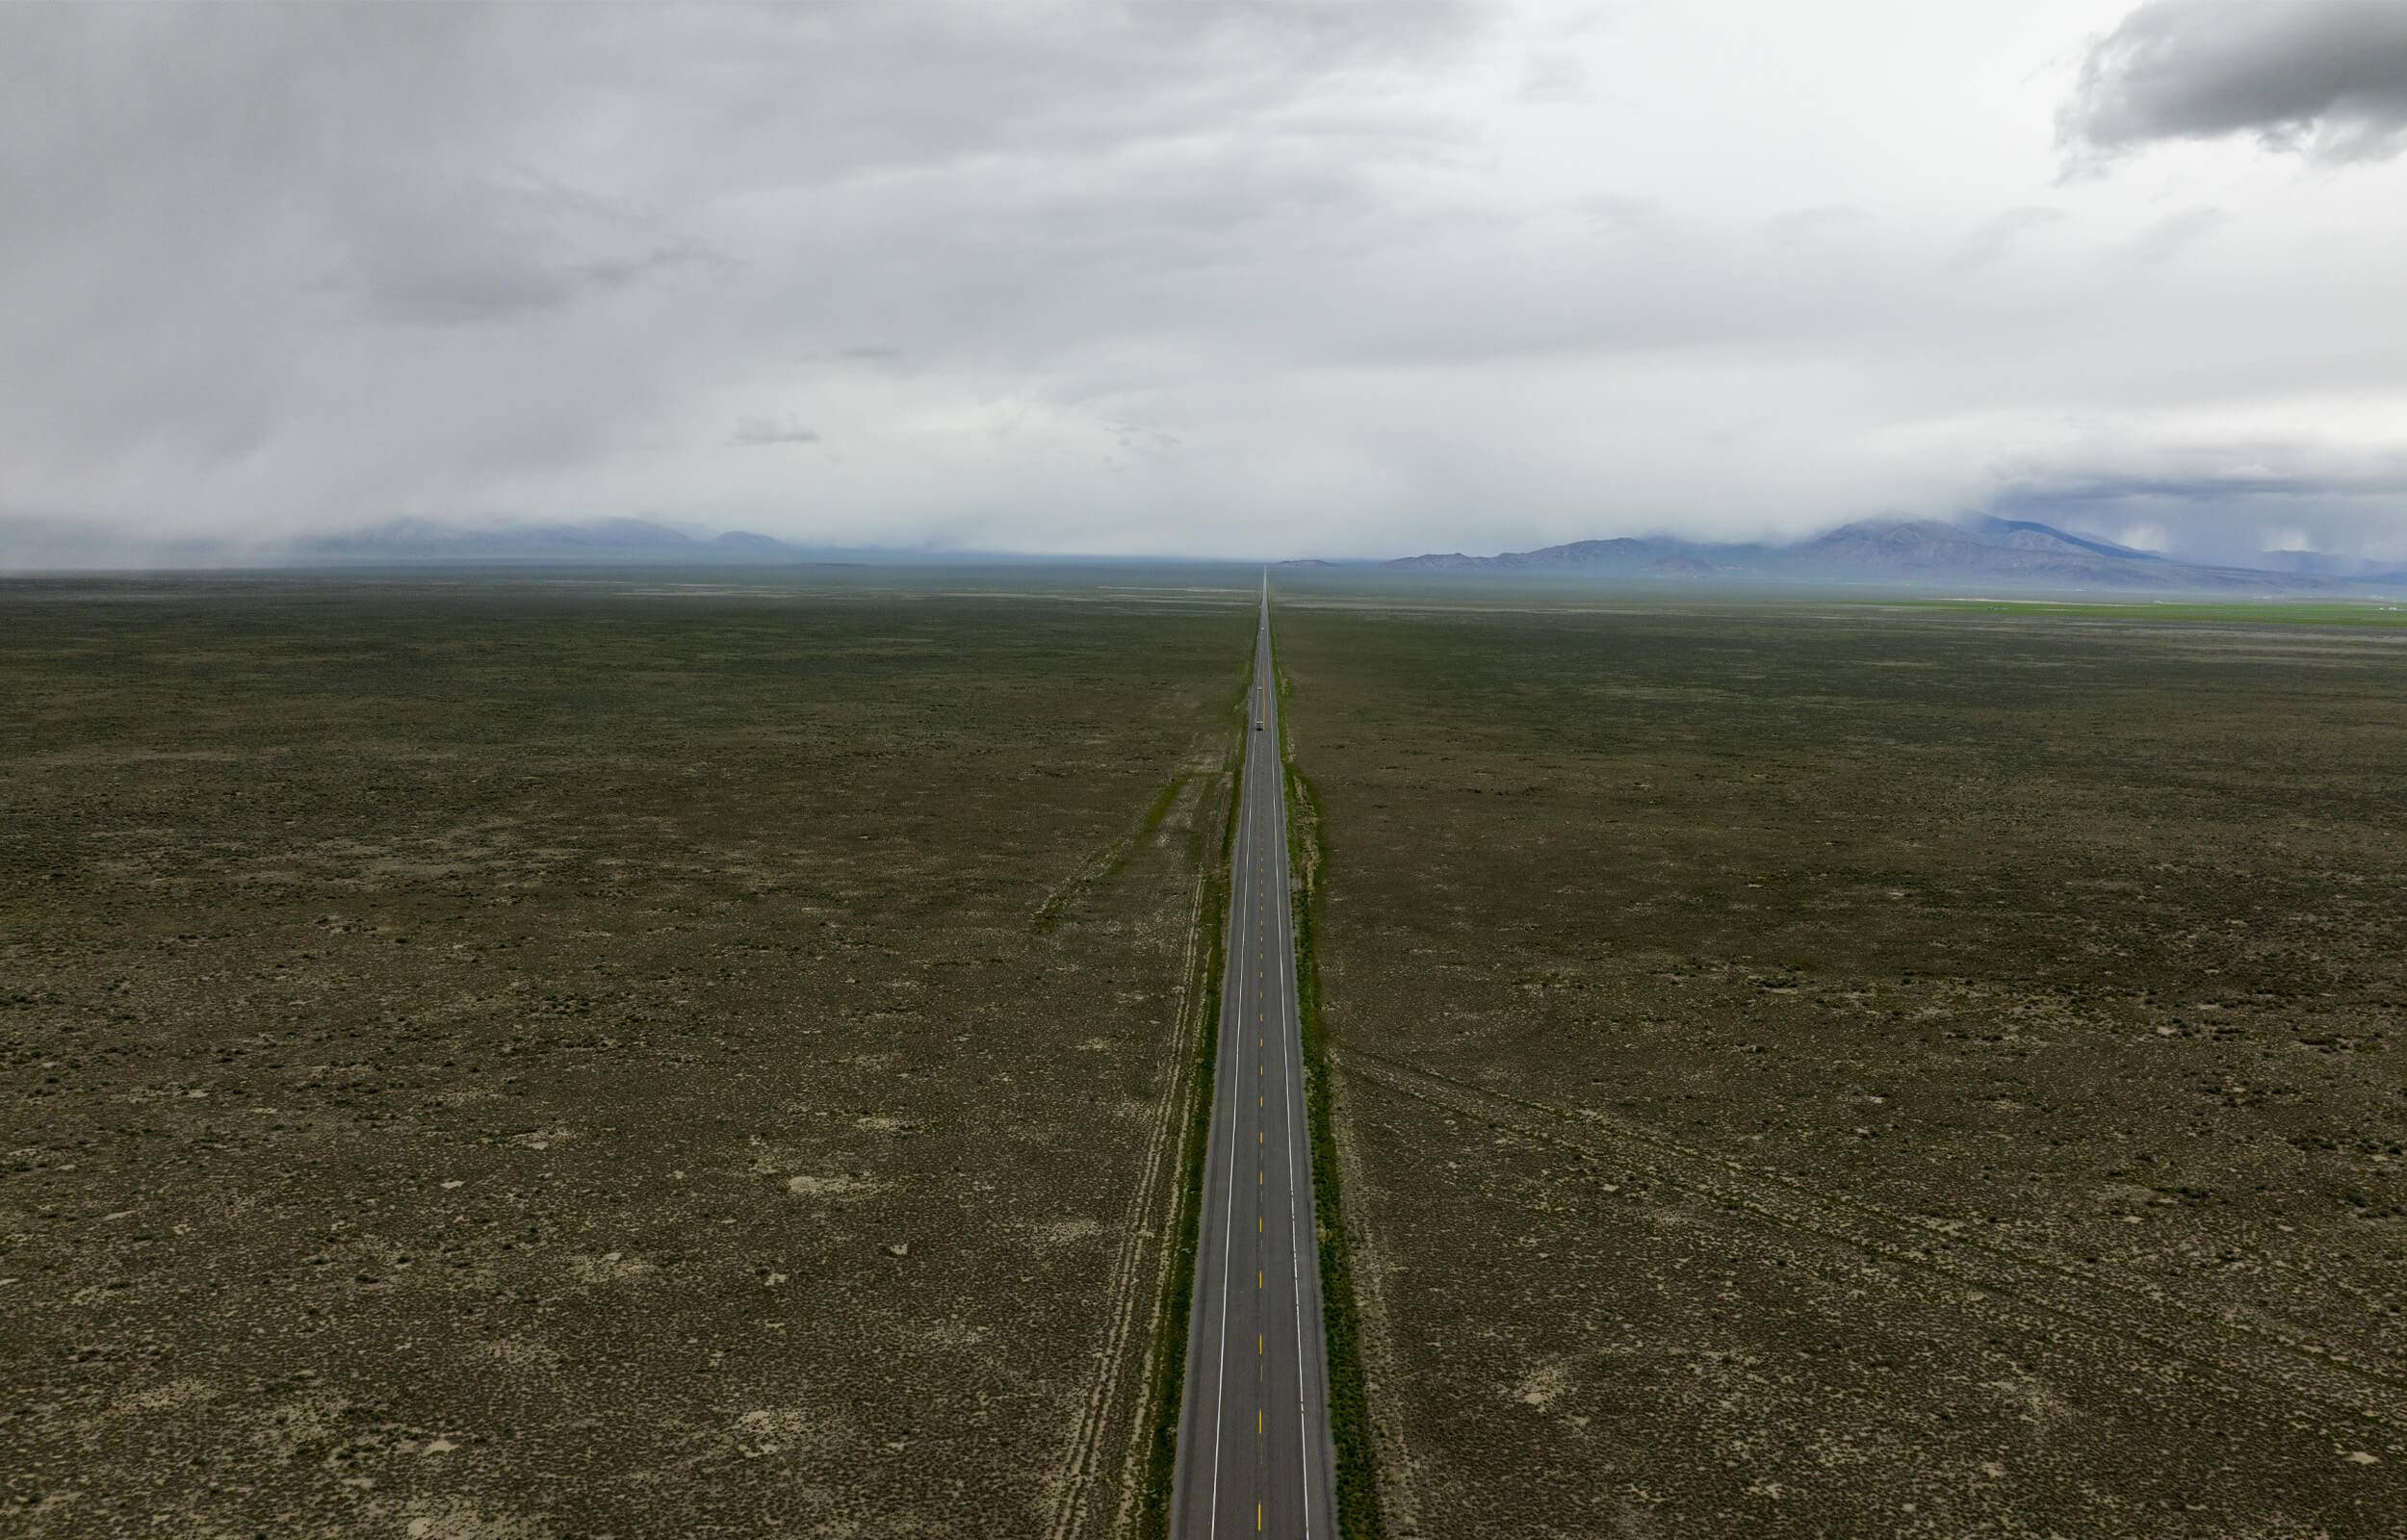 A long stretch of road surrounded by wide open fields, with mountains in the distance.